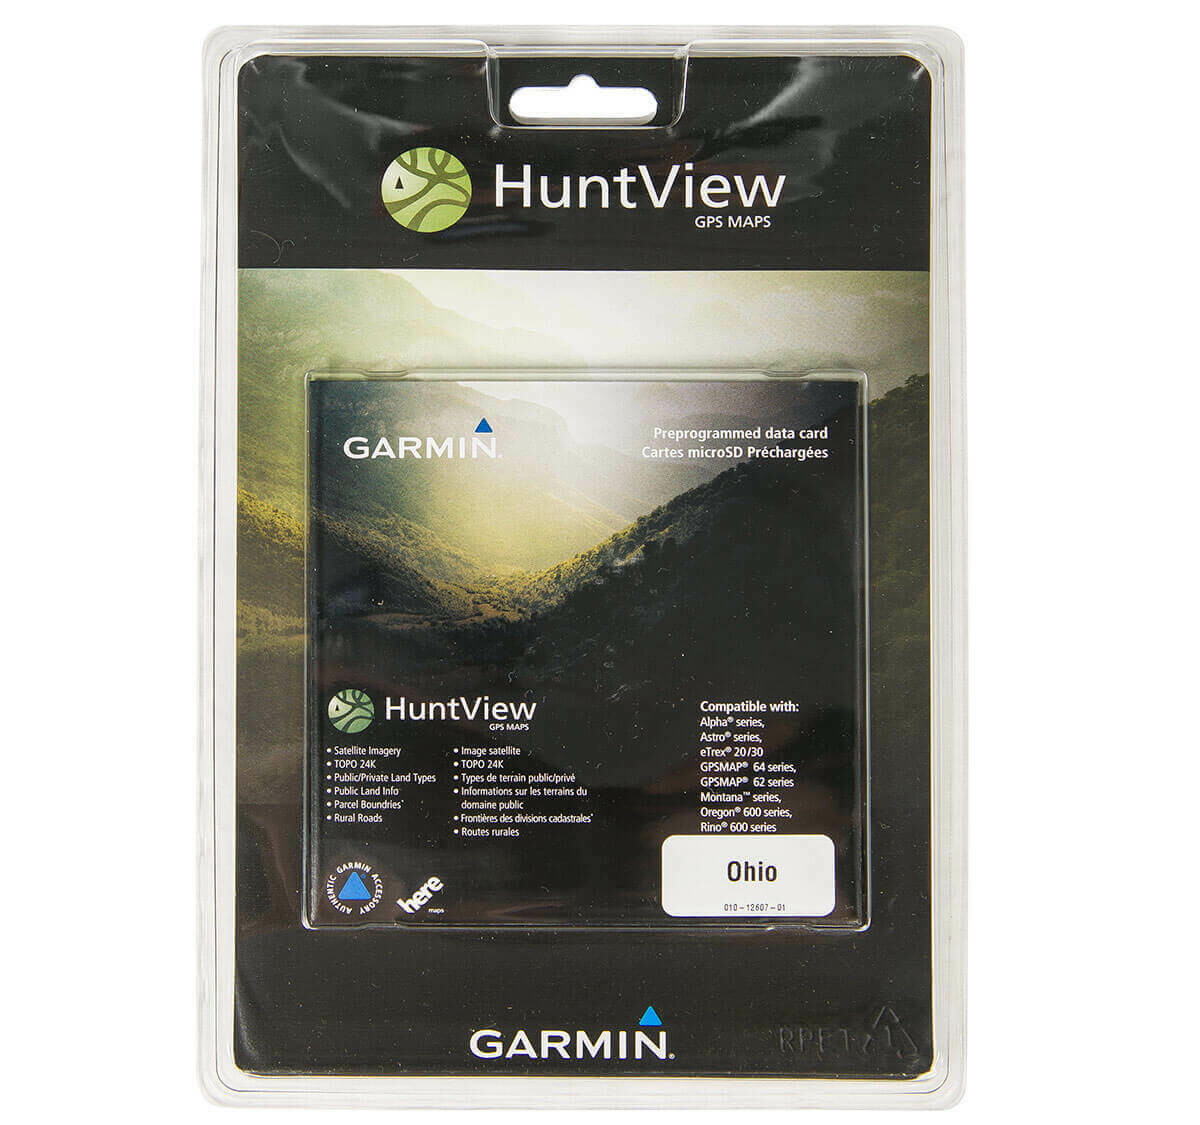 Huntview plus map cards